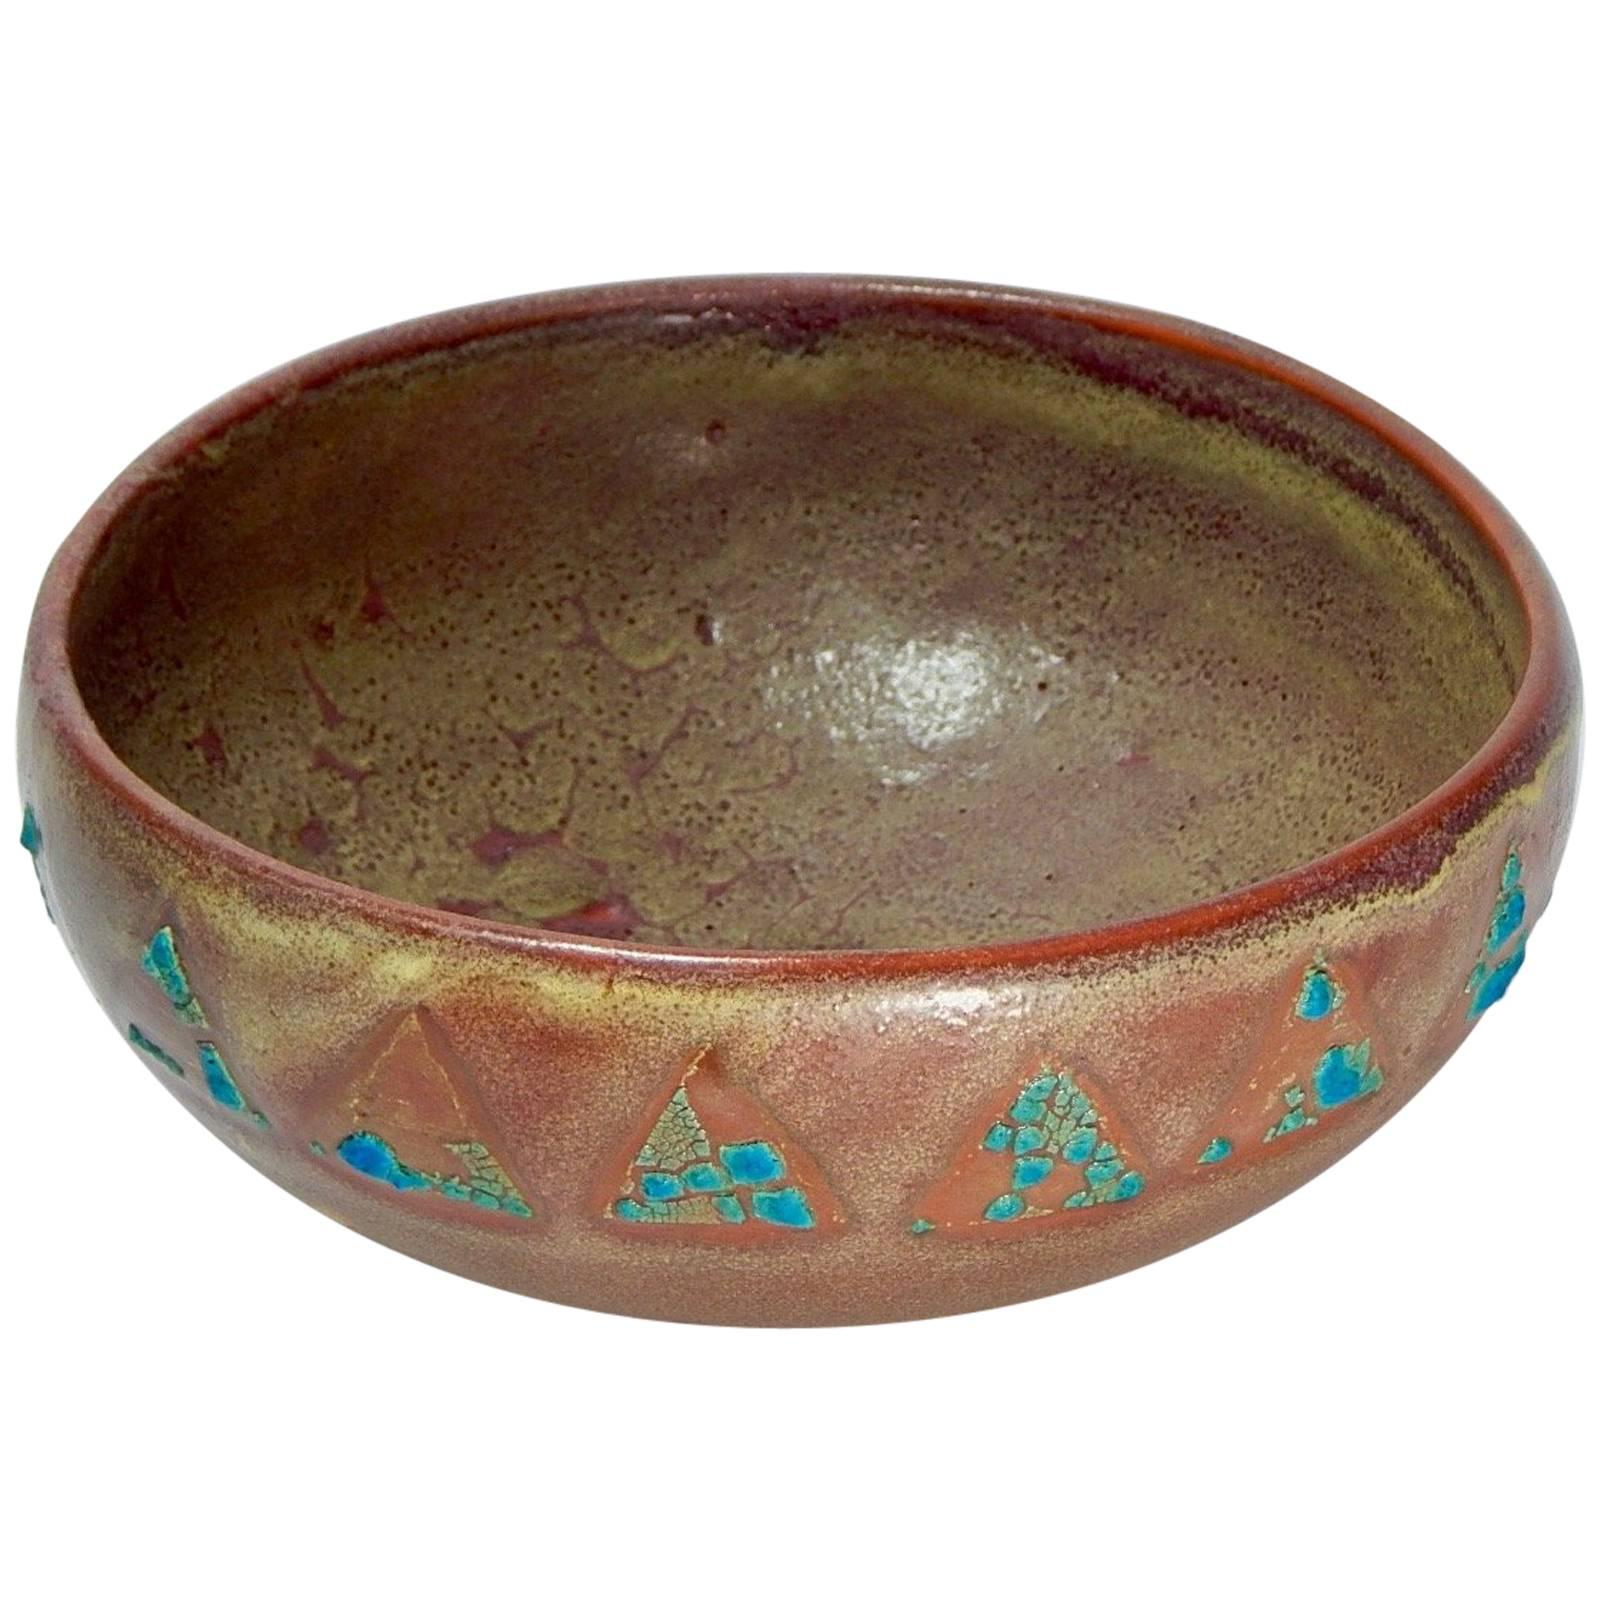 Relicware Earthenware Bowl # 87 by Andrew Wilder